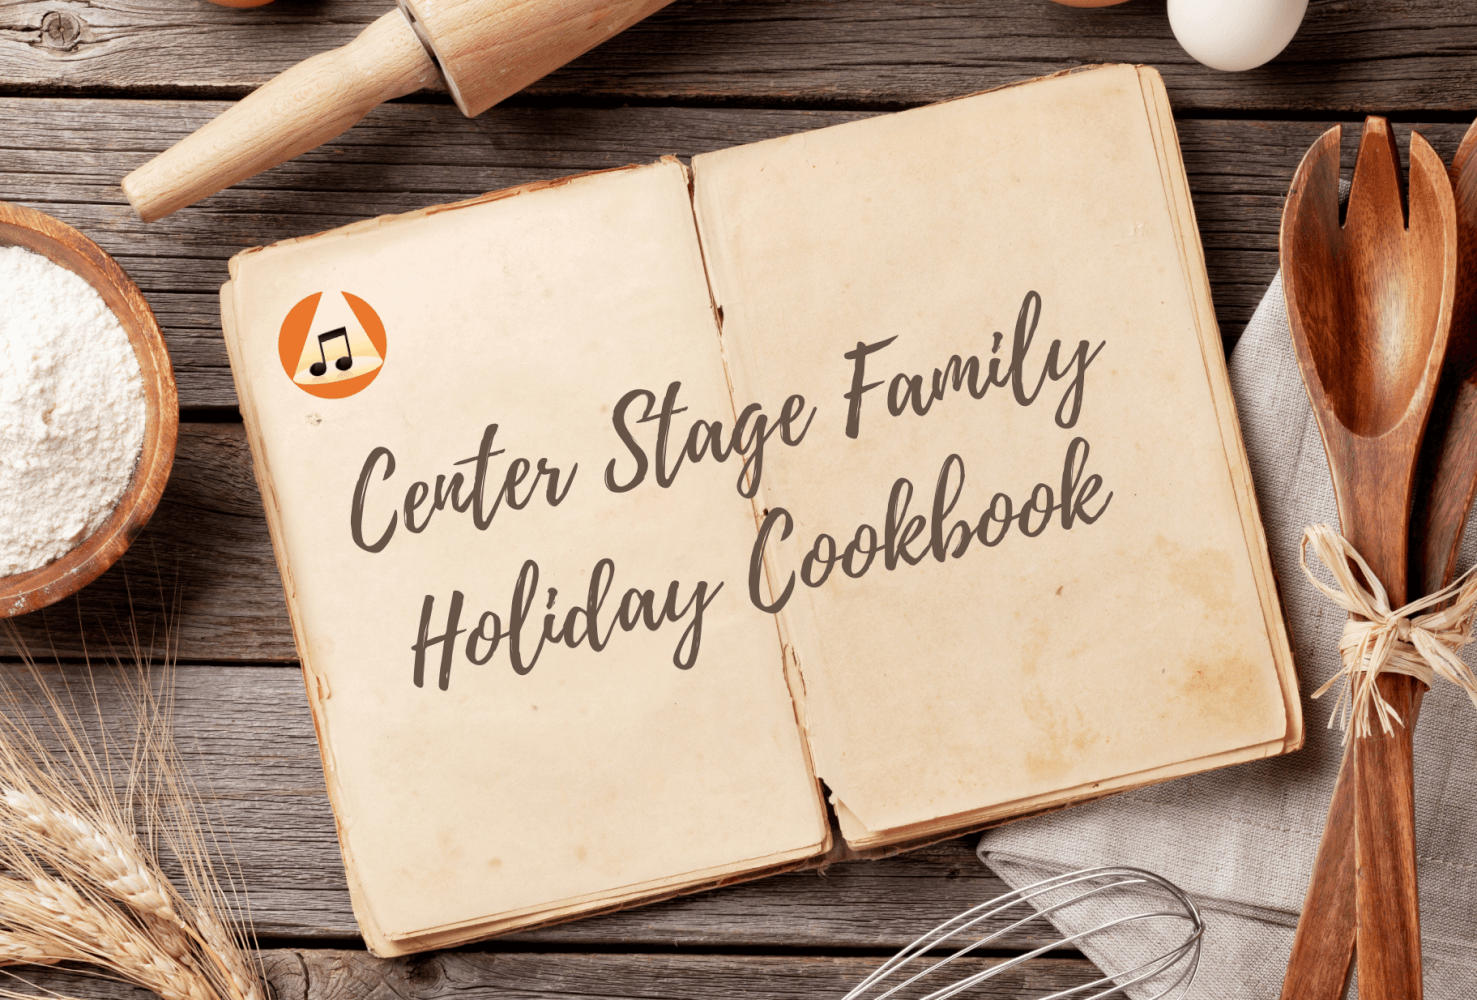 Center Stage Family Holiday Cookbook